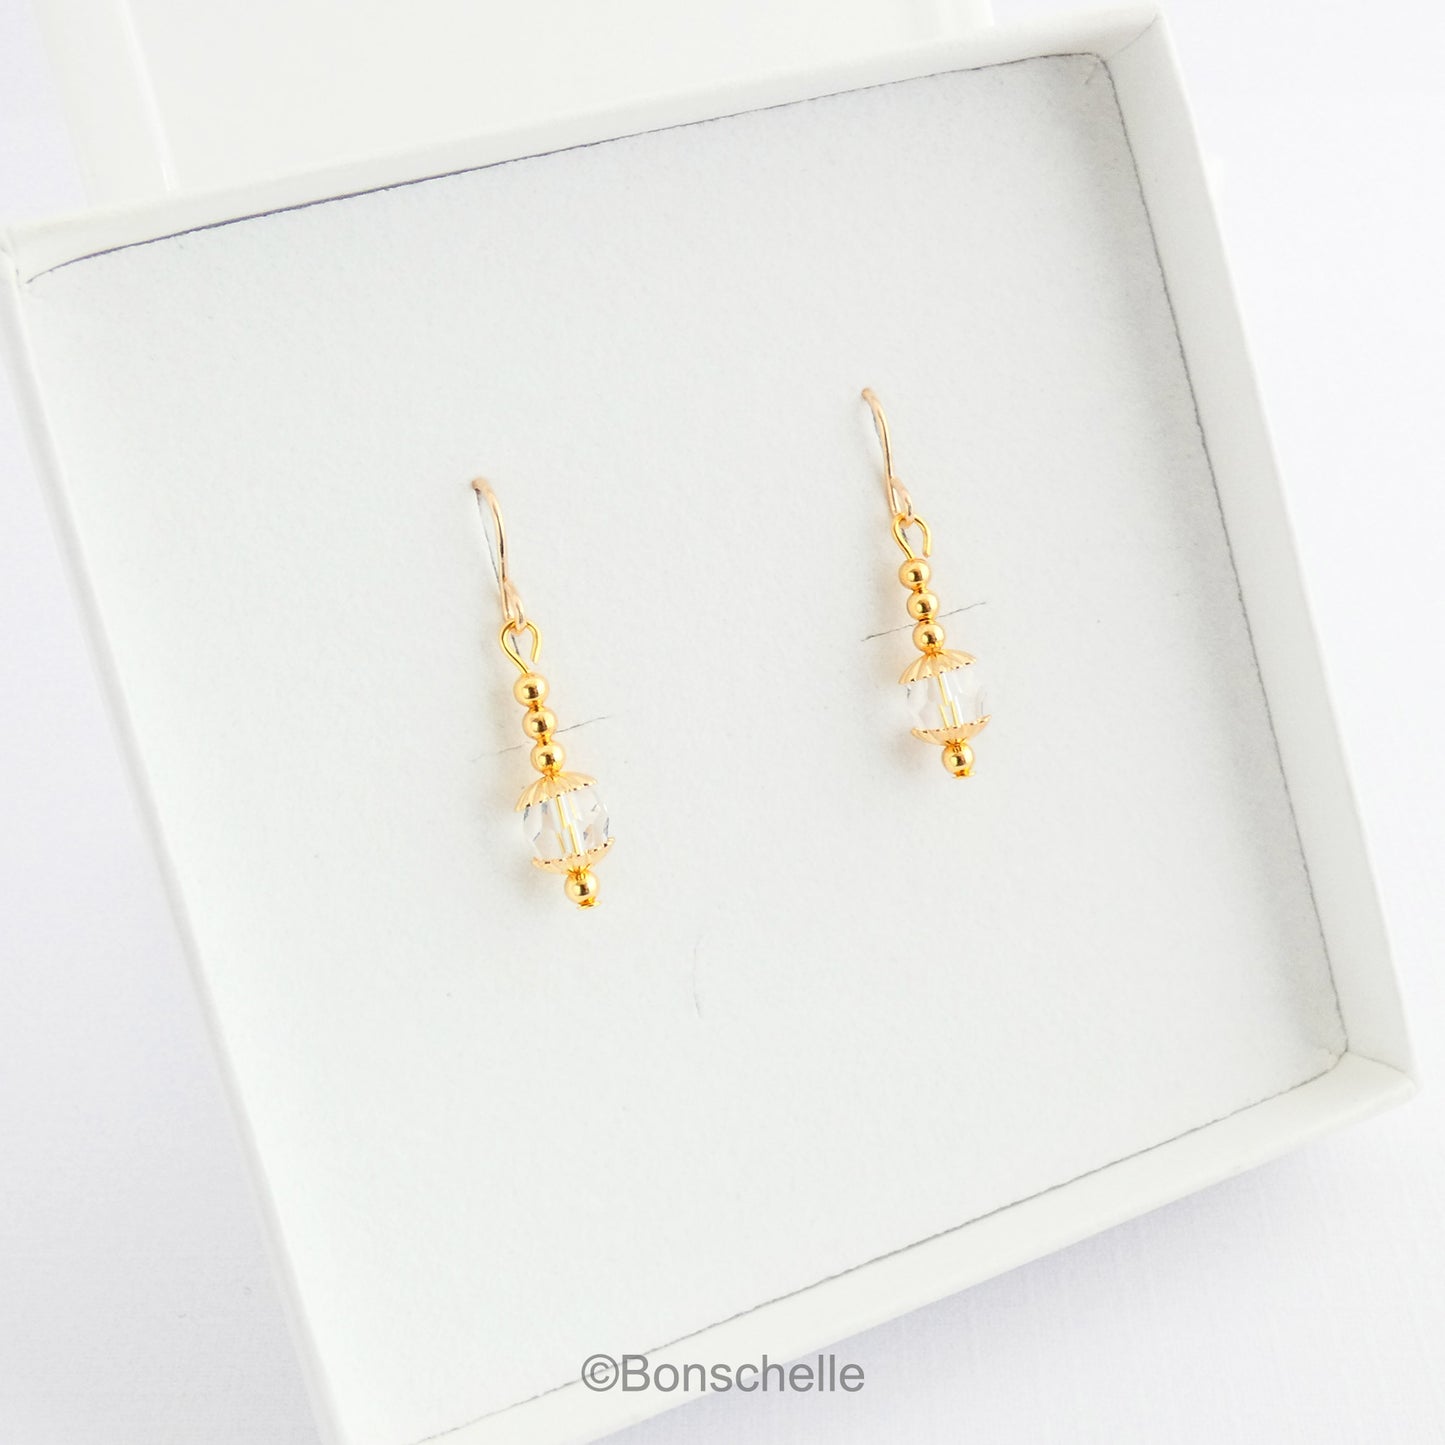 Handmade earrings with clear Swarovksi faceted crystall glass beads, gold tone small beads adn 14K gold filled earwires in a jewellery box